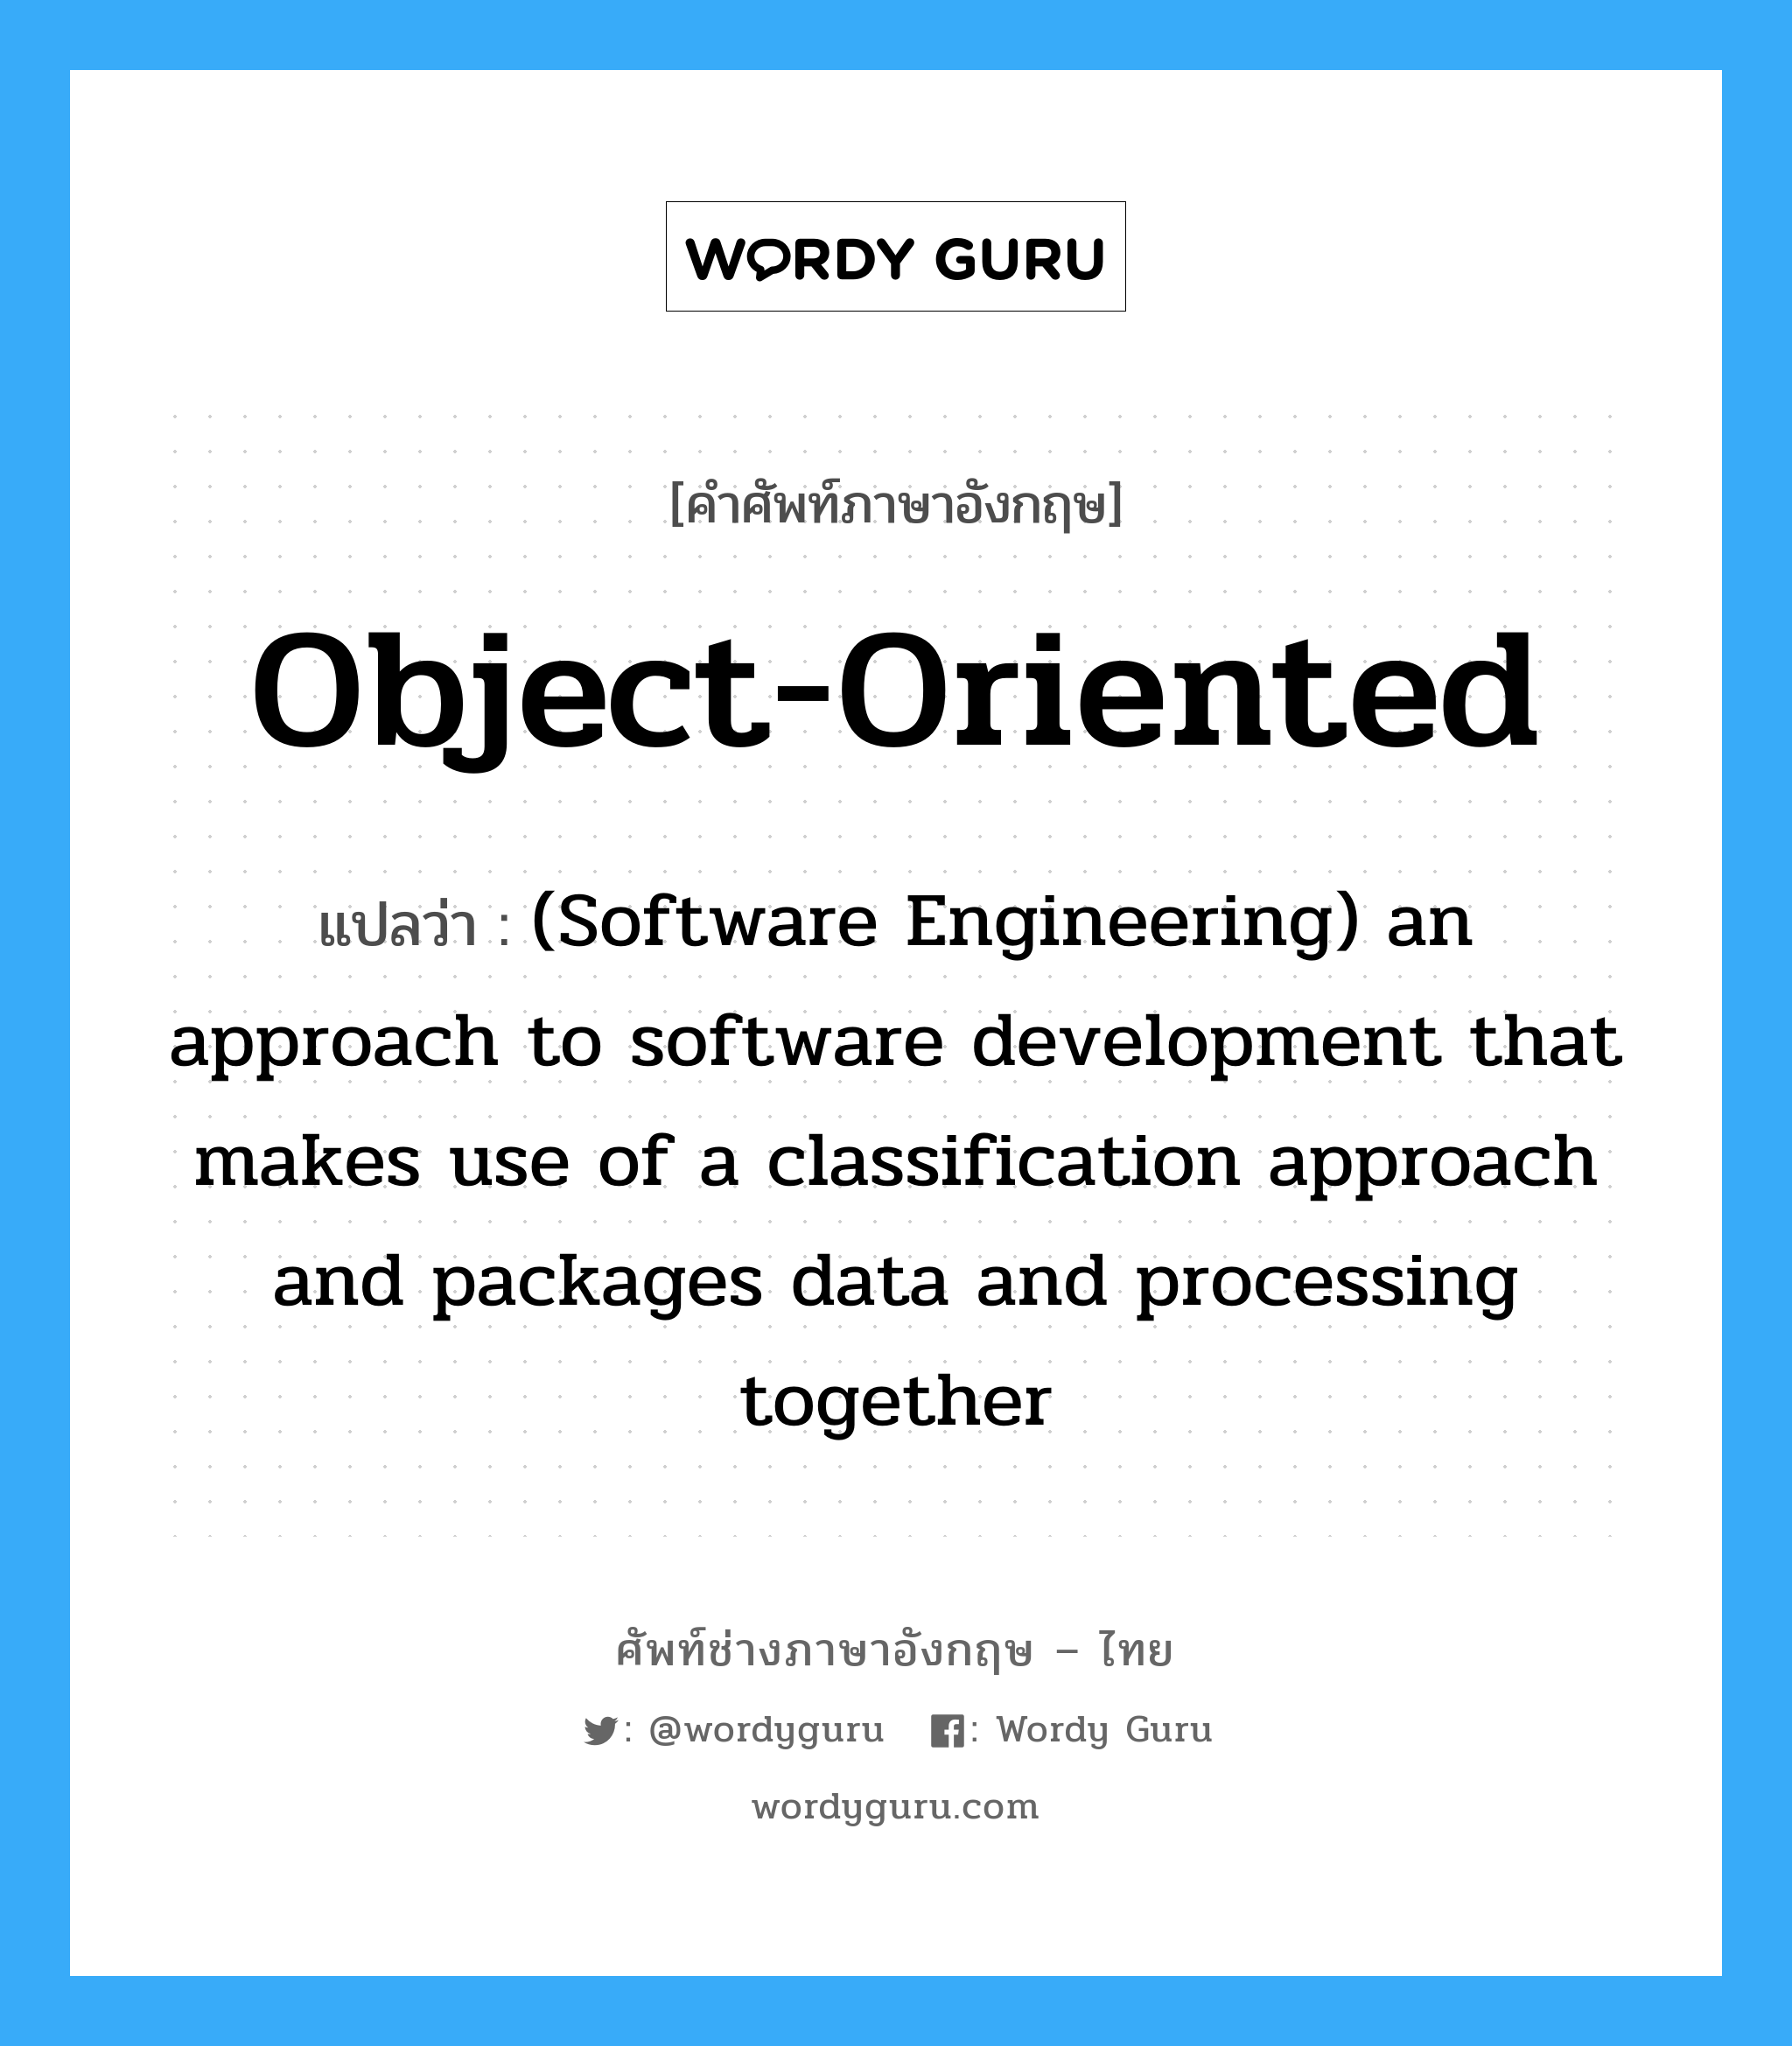 Object-oriented แปลว่า?, คำศัพท์ช่างภาษาอังกฤษ - ไทย Object-oriented คำศัพท์ภาษาอังกฤษ Object-oriented แปลว่า (Software Engineering) an approach to software development that makes use of a classification approach and packages data and processing together